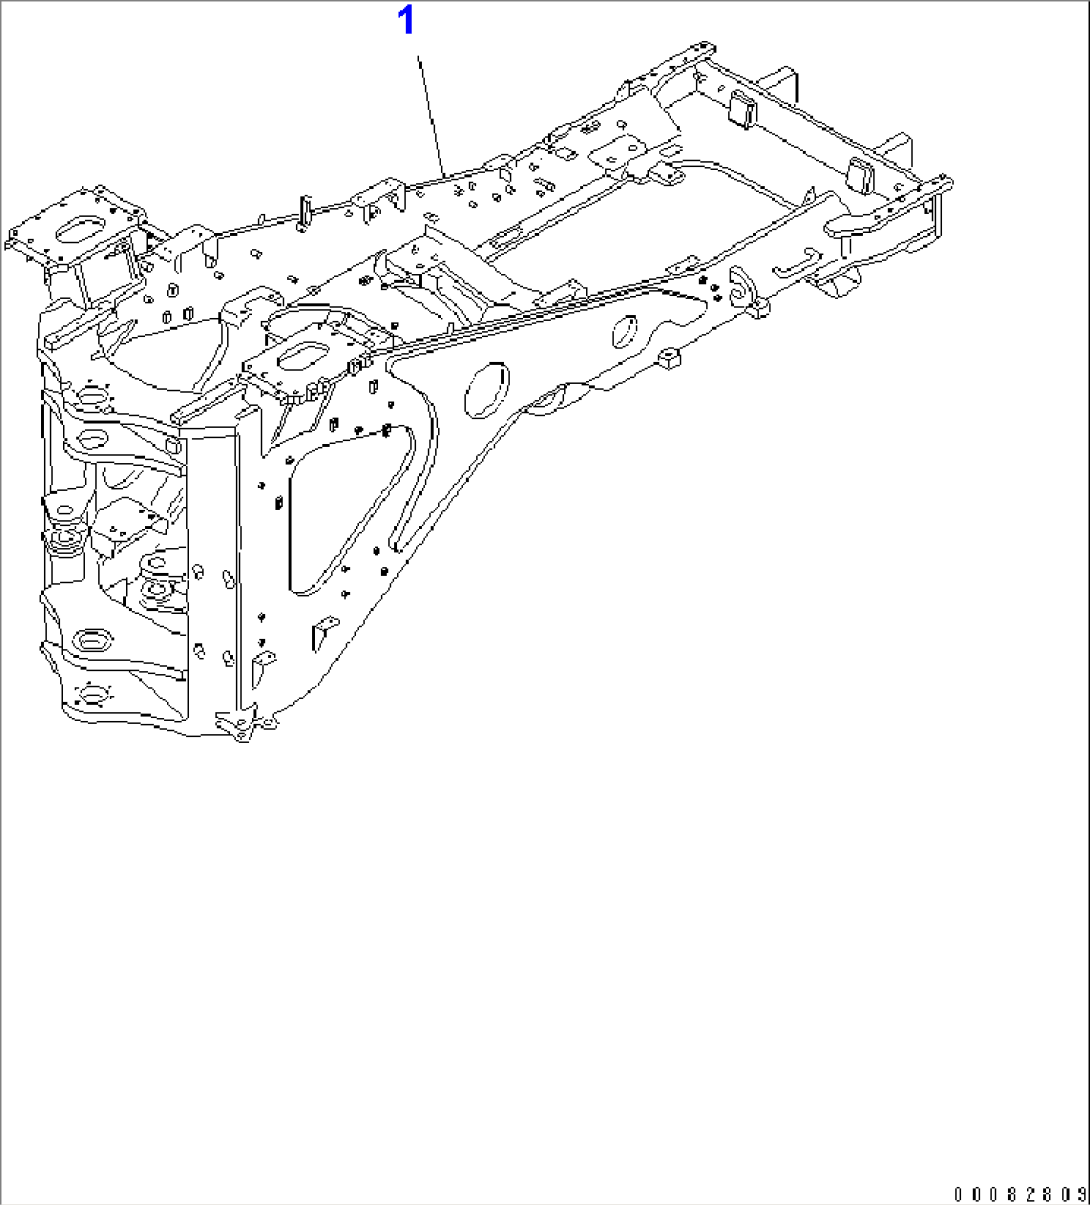 REAR FRAME (WITH HYDRAULIC QUICK COUPLER) (55ßC SPEC.)(#50001-50013)